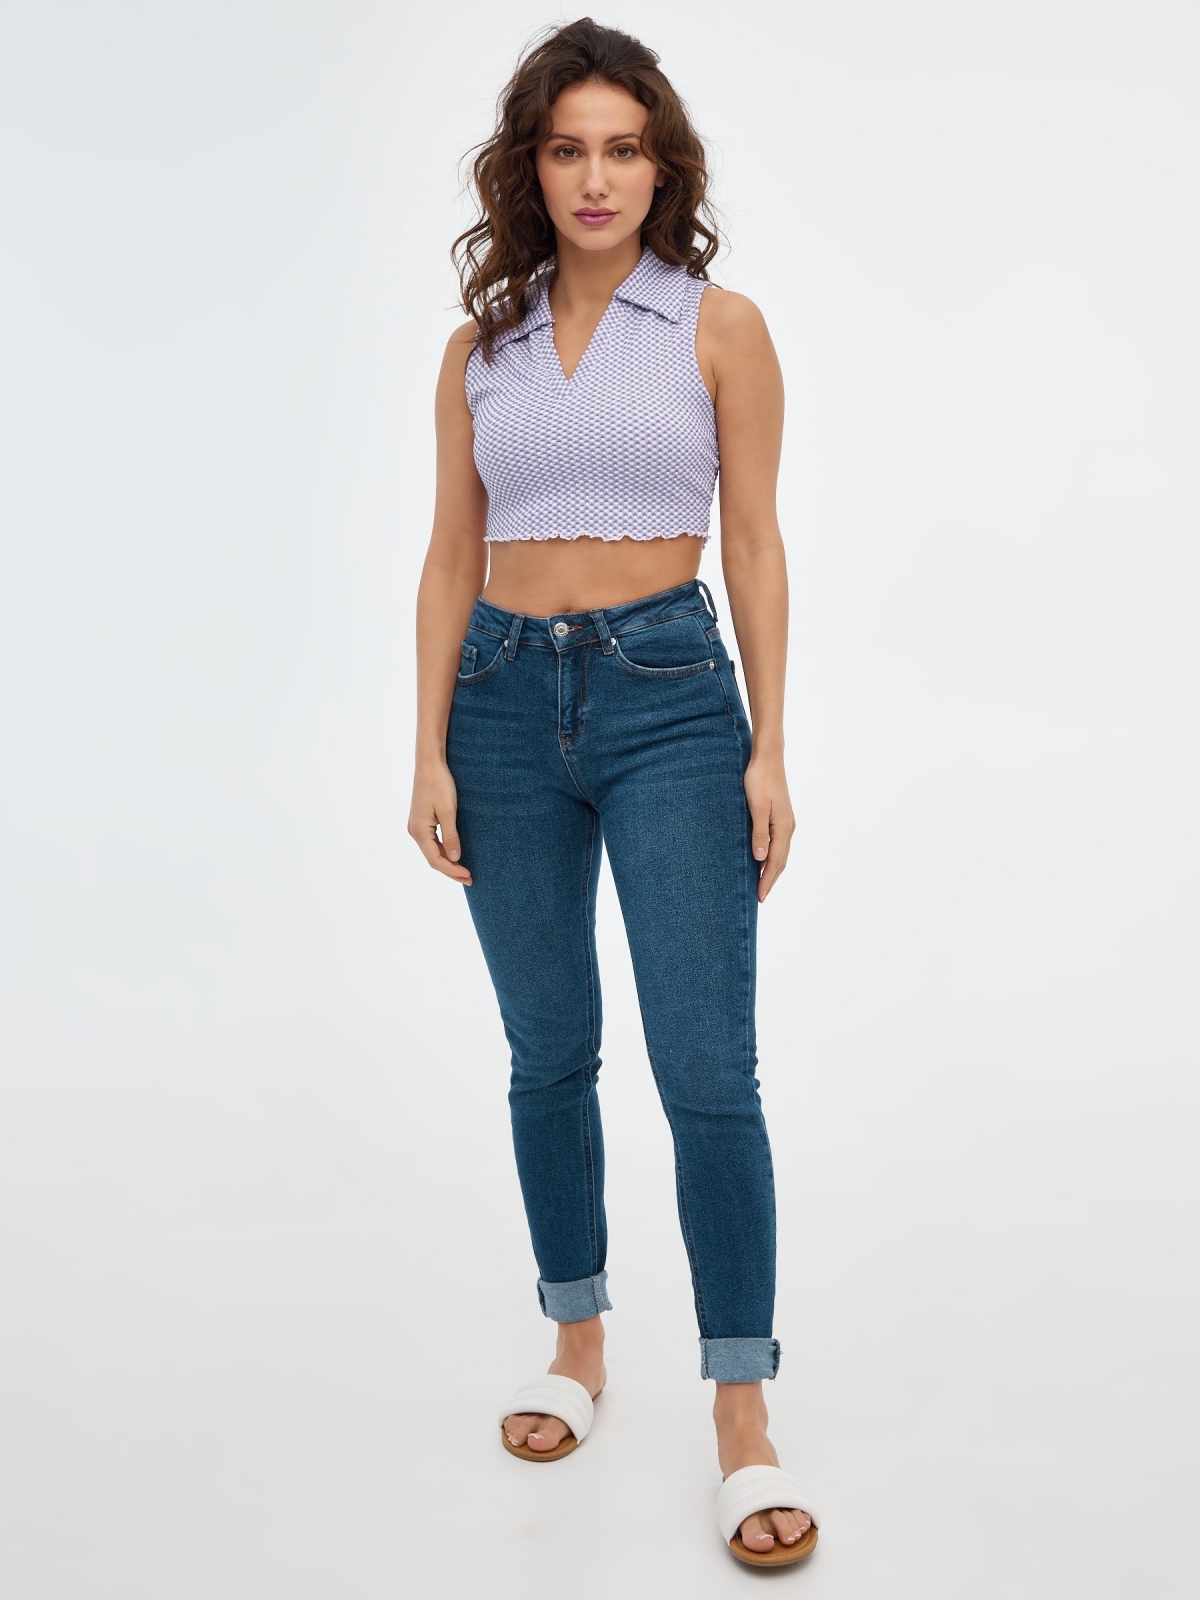 Sleeveless crop top mauve front view